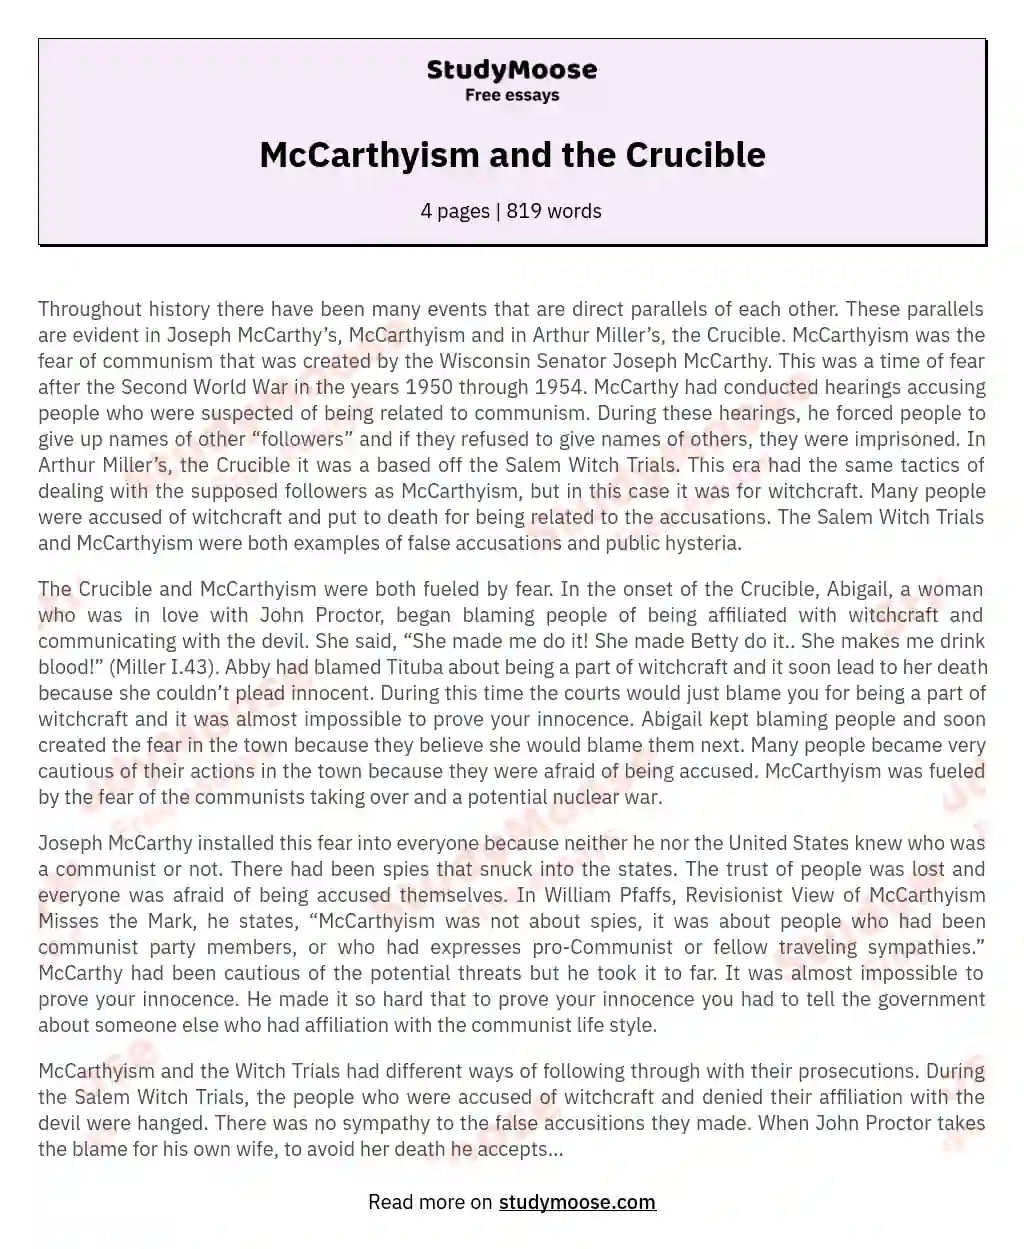 McCarthyism and Witch Trials: Fear's Impact on Society essay